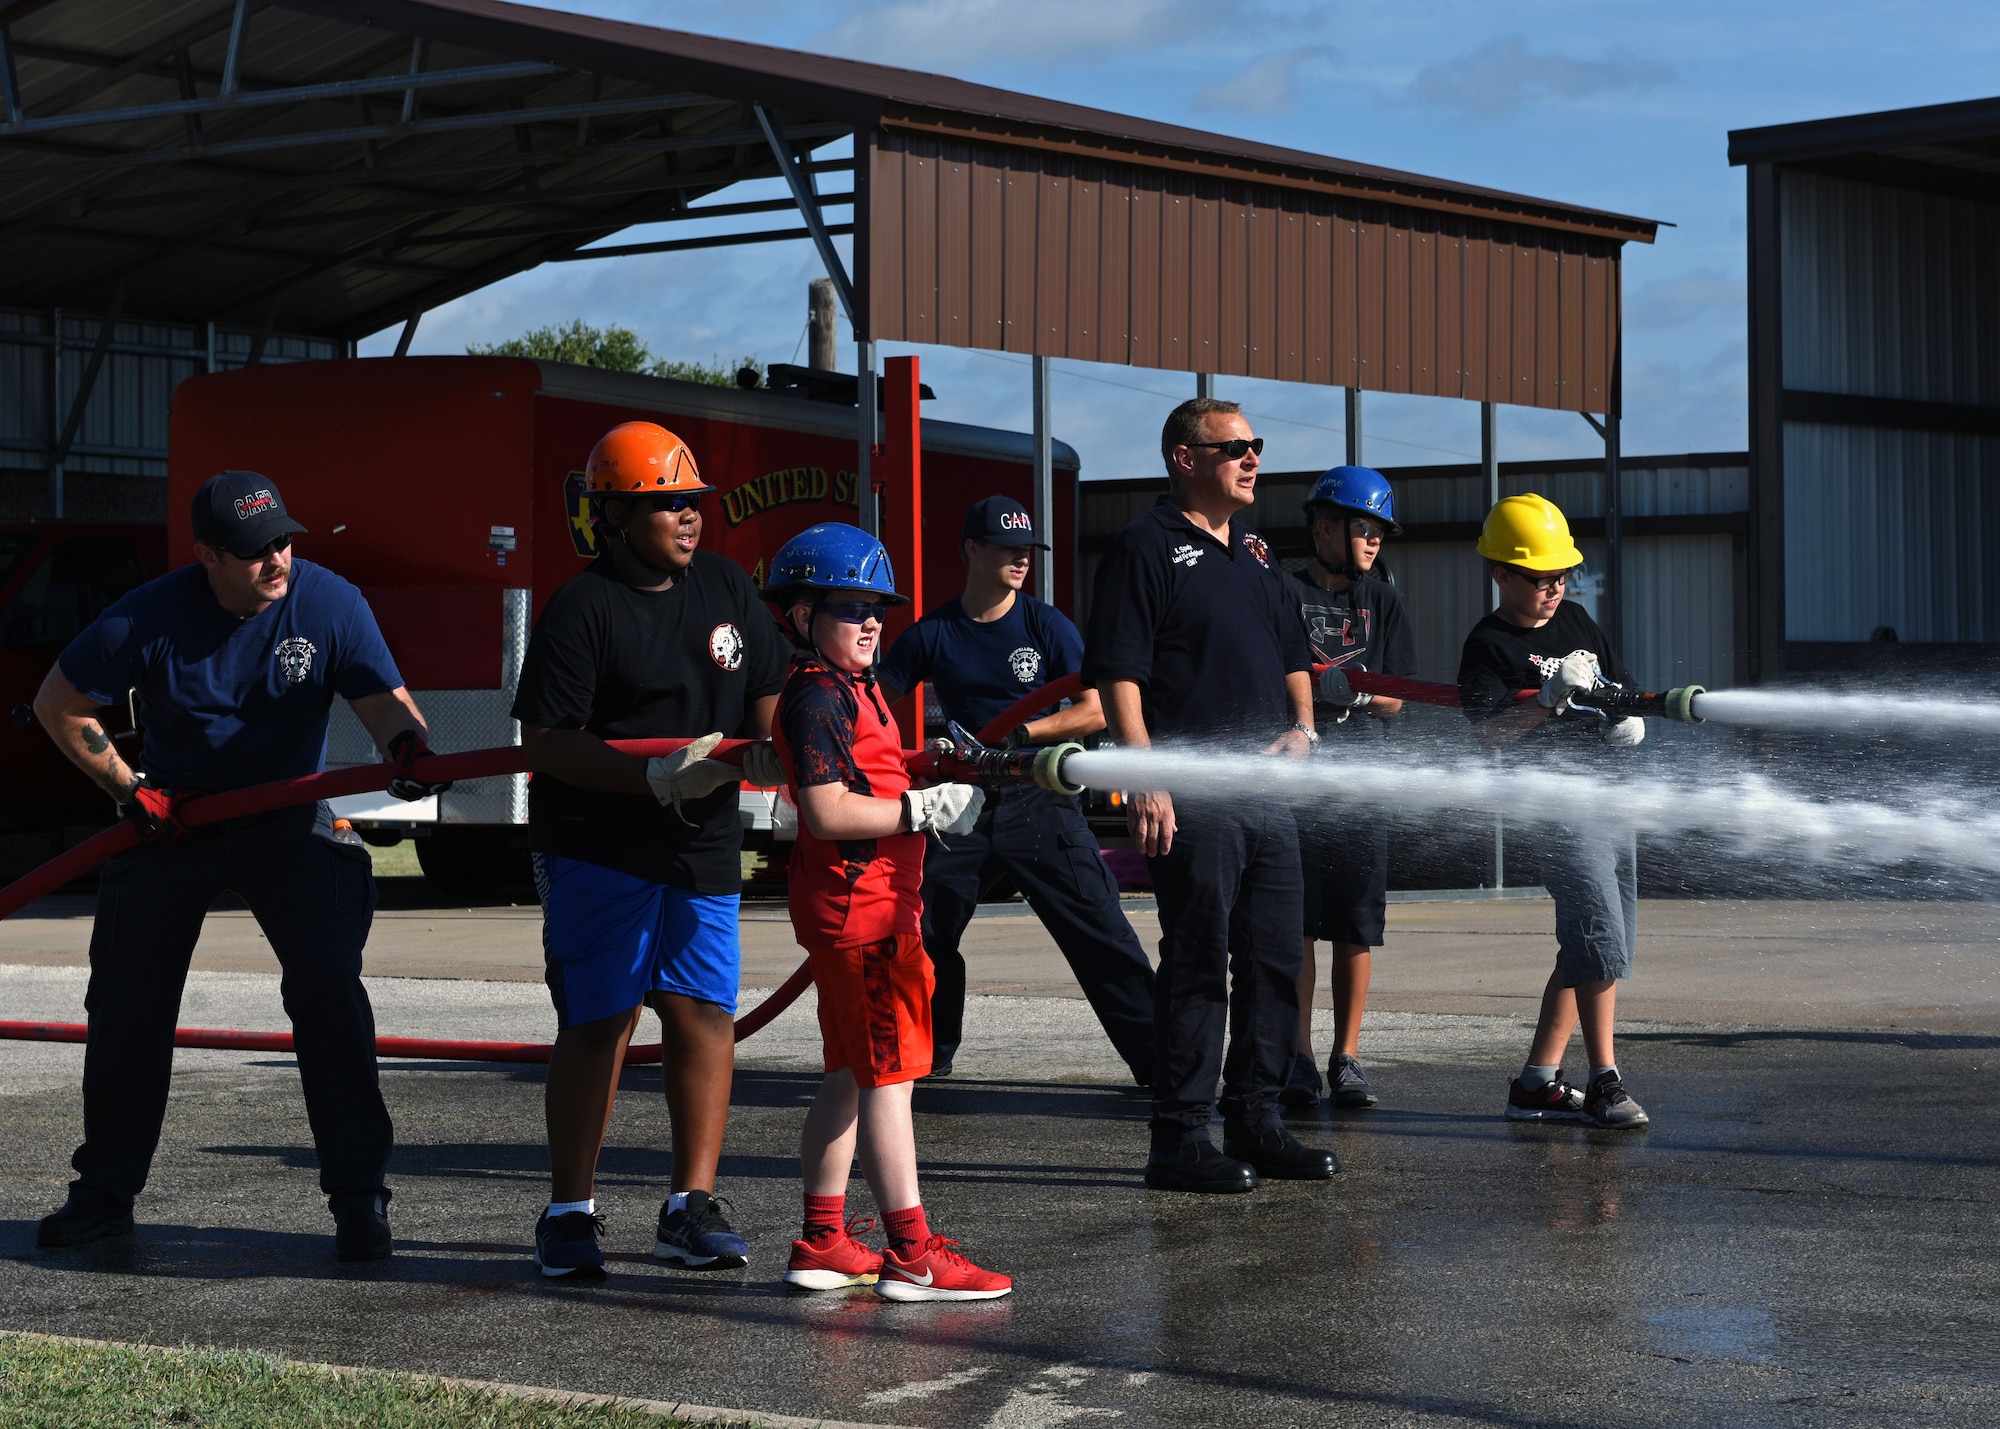 Firefighters from the 17th Civil Engineering Squadron train junior firefighters how to properly operate a fire hose at the Goodfellow Air Force Base Fire Department on Goodfellow Air Force Base, Texas, July 17, 2019. The junior firefighters completed a drill in which they learned how to correctly carry the hose and spray water to knock road cones over. (U.S. Air Force photo by Airman 1st Class Robyn Hunsinger/Released)